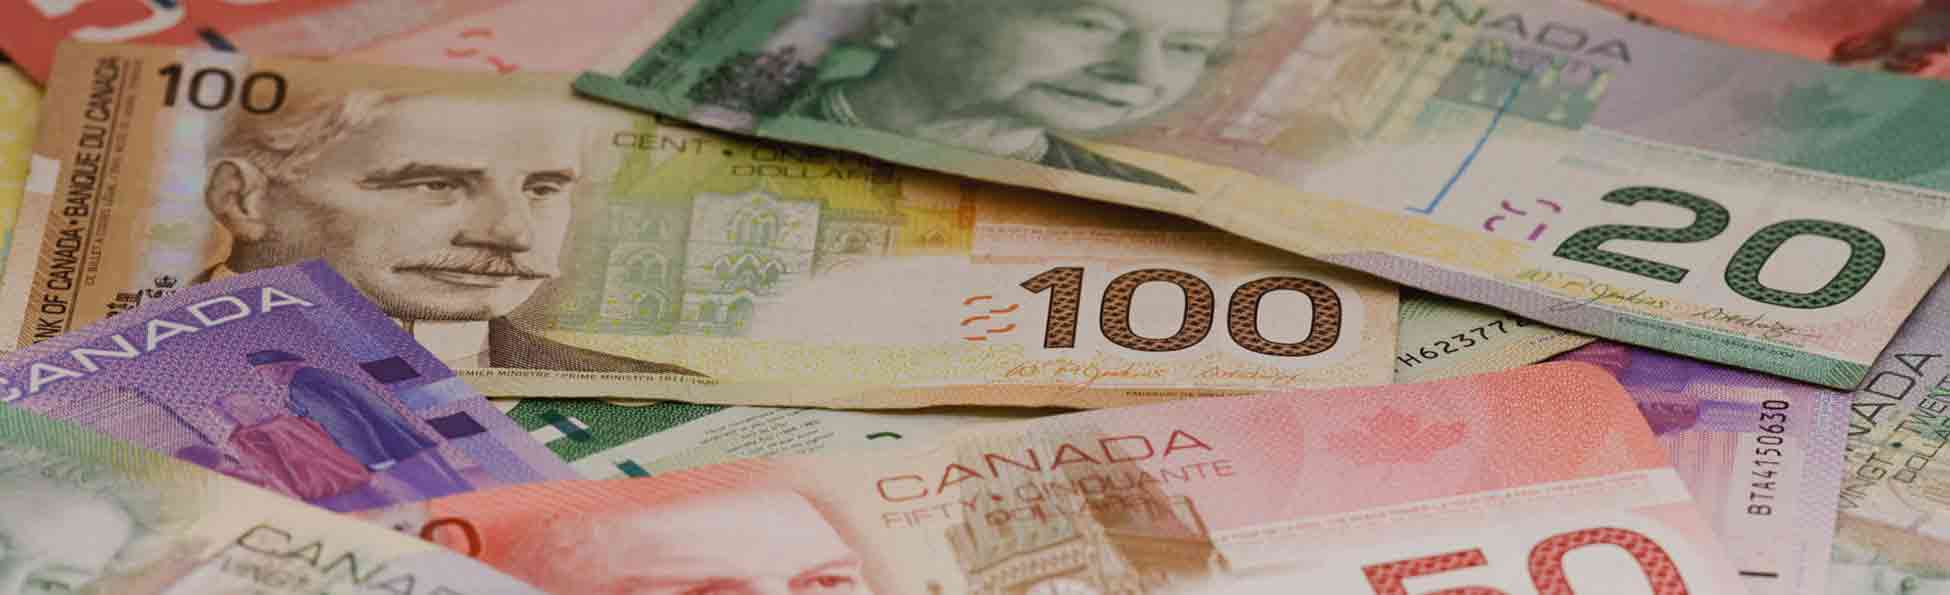 mediakits.theygsgroup.com - Online payday loans and cash advances anywhere in Canada